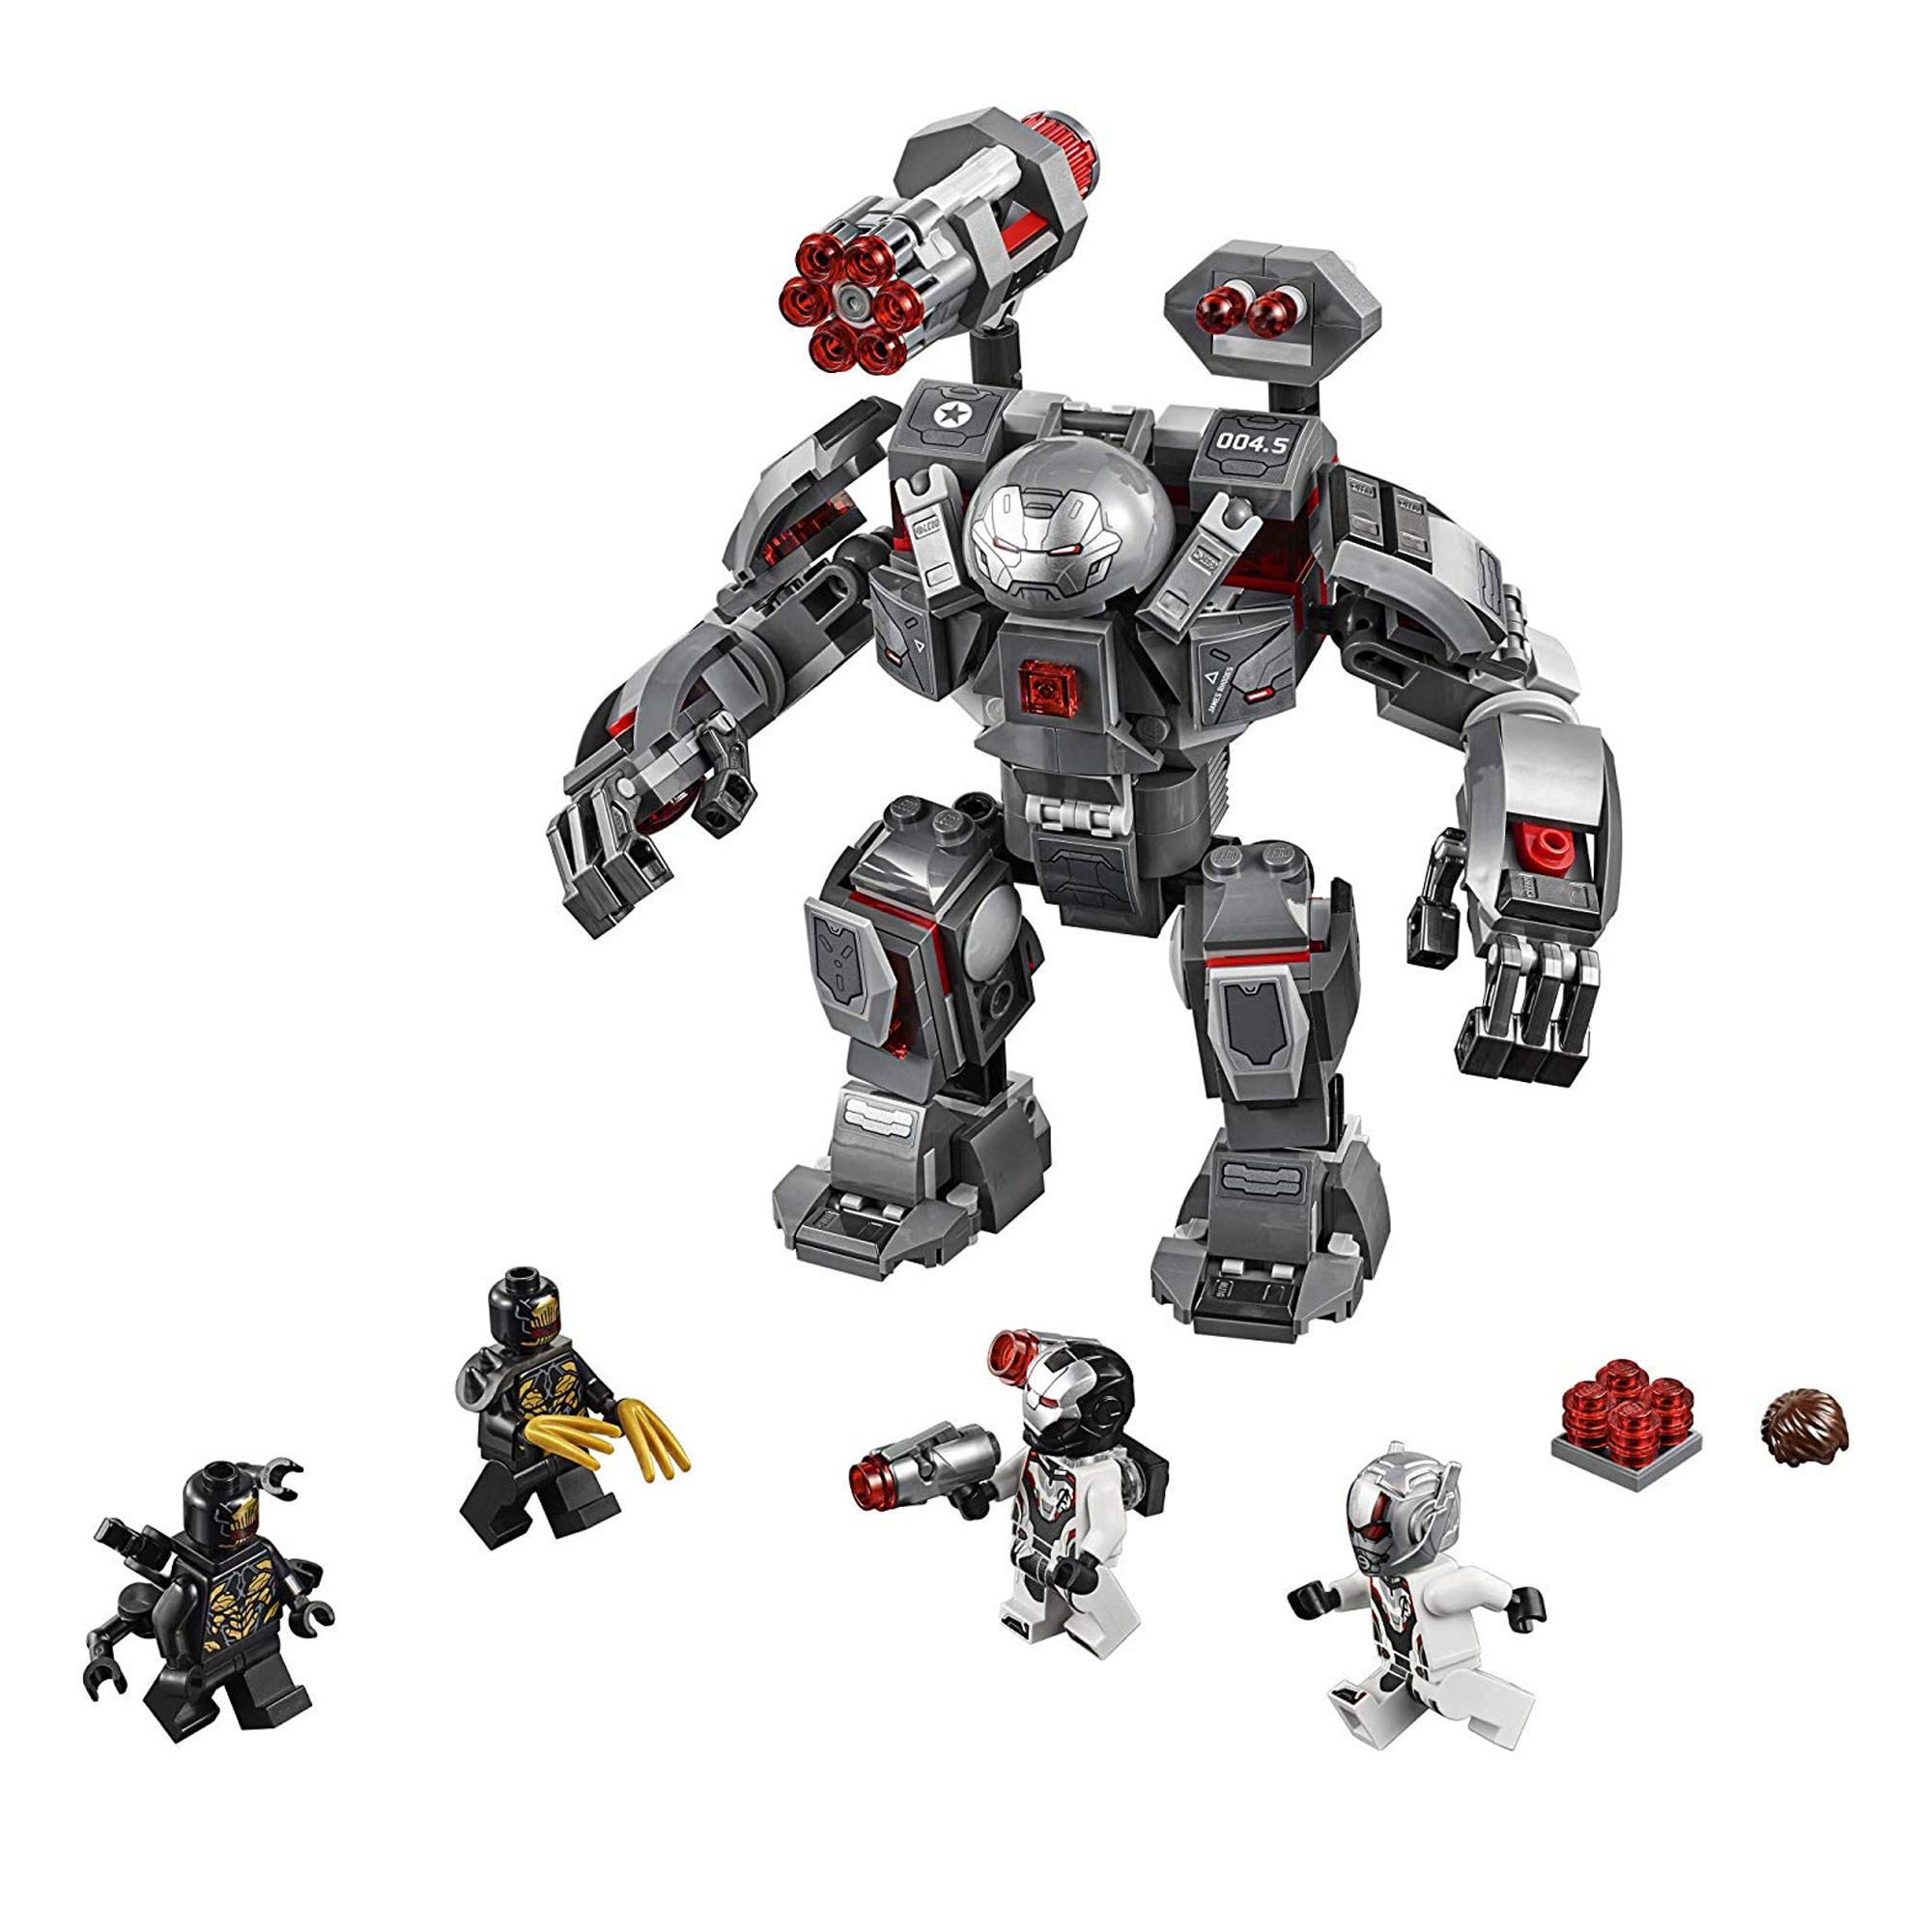 LEGO Marvel Avengers War Machine Buster 76124 Building Kit (362 Pieces) - image 3 of 8